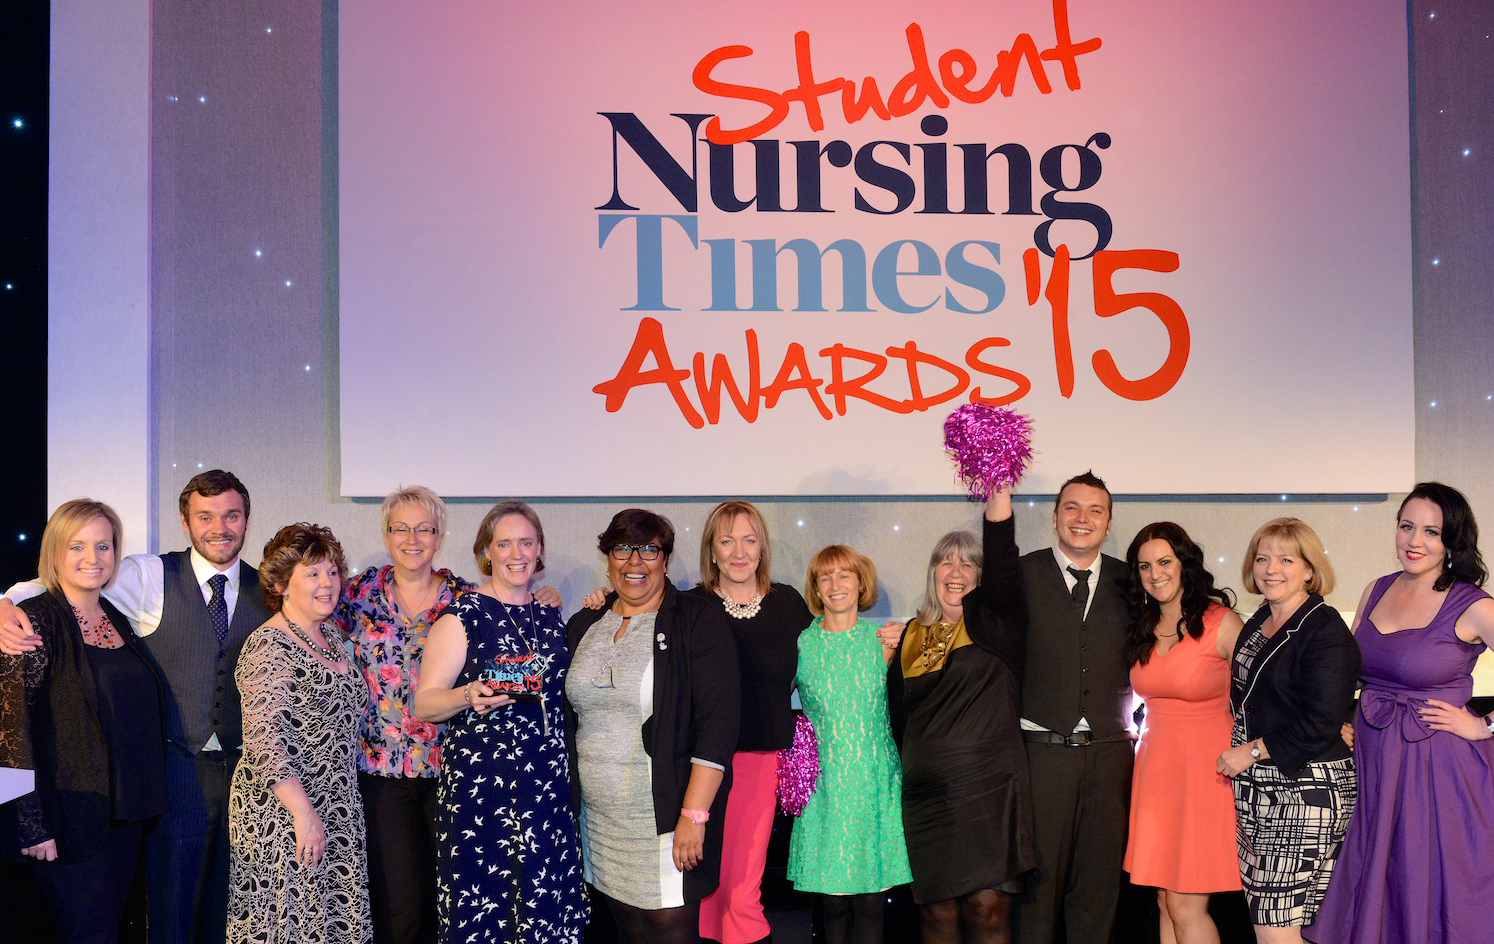 Nursing students and staff celebrate at this year's Student Nursing Times Awards